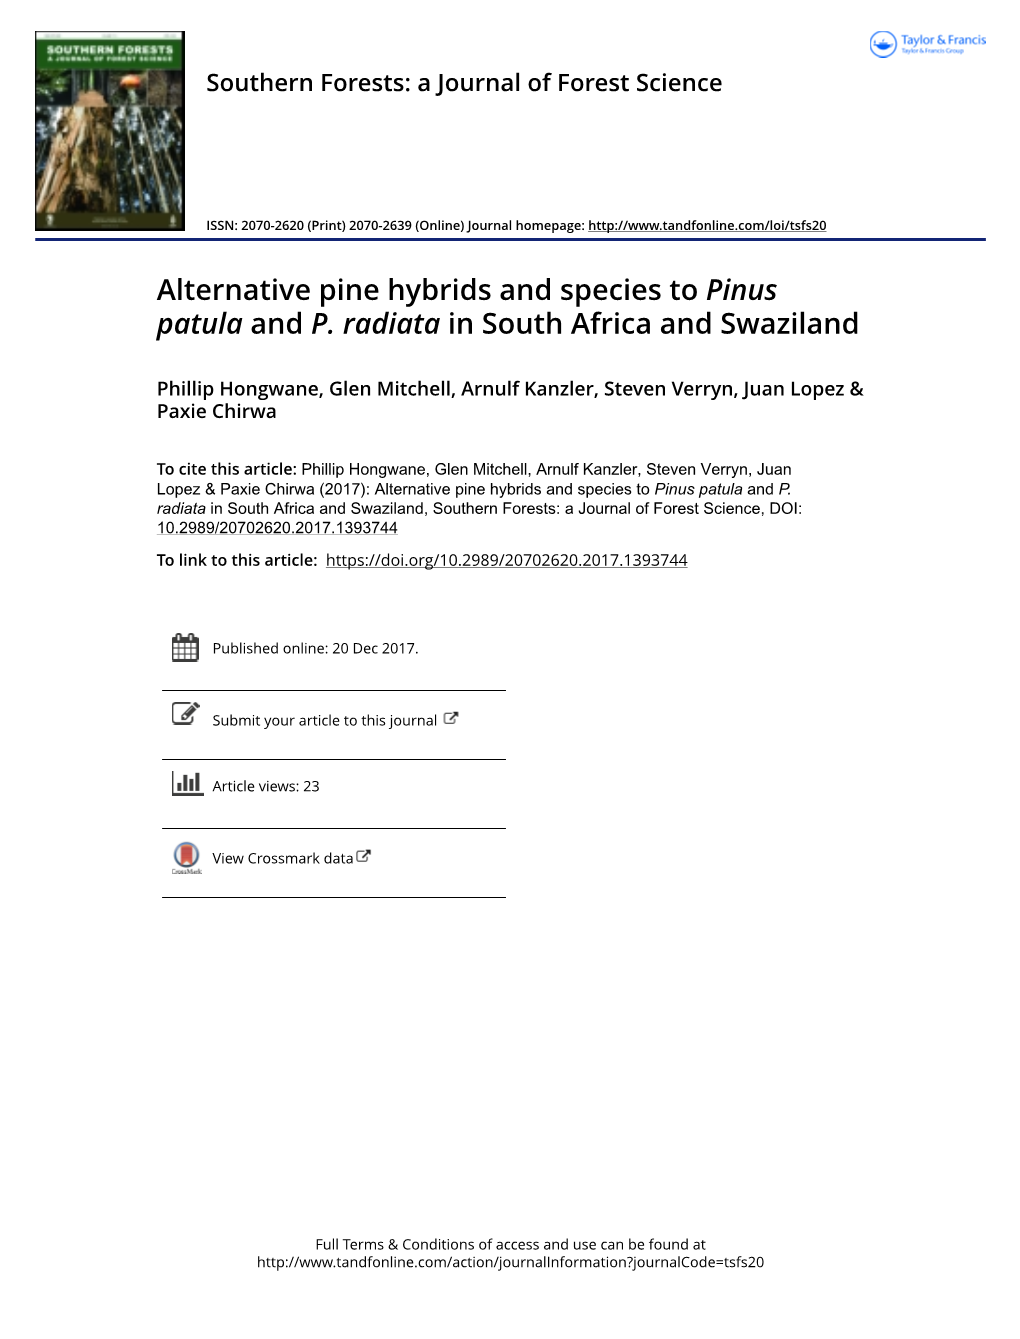 Alternative Pine Hybrids and Species to Pinus Patula and P. Radiata in South Africa and Swaziland